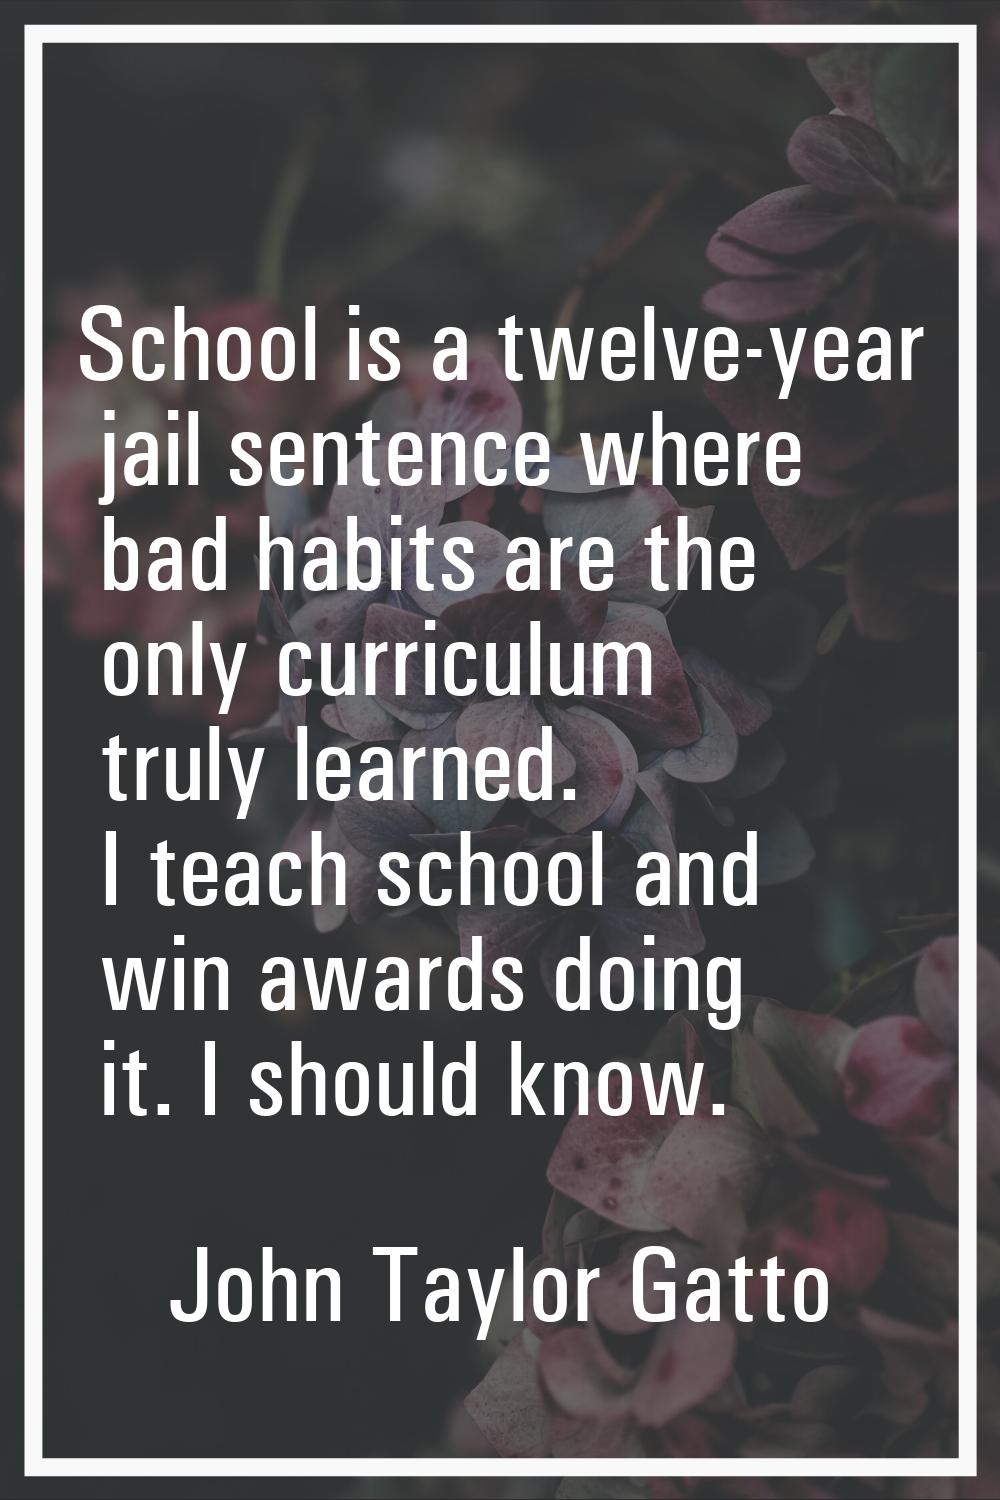 School is a twelve-year jail sentence where bad habits are the only curriculum truly learned. I tea